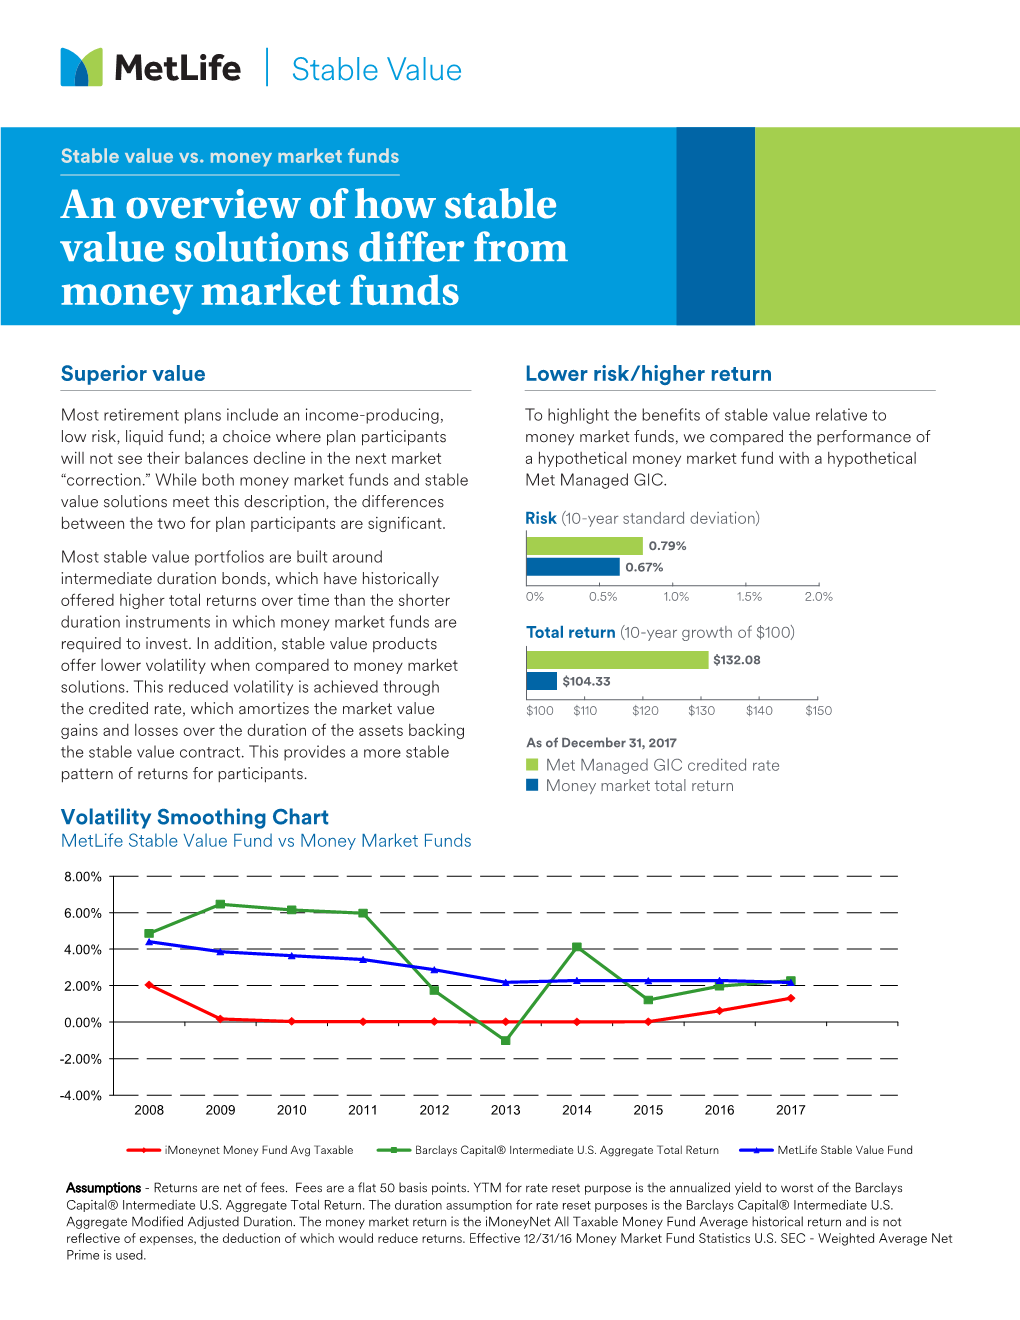 An Overview of How Stable Value Solutions Differ from Money Market Funds